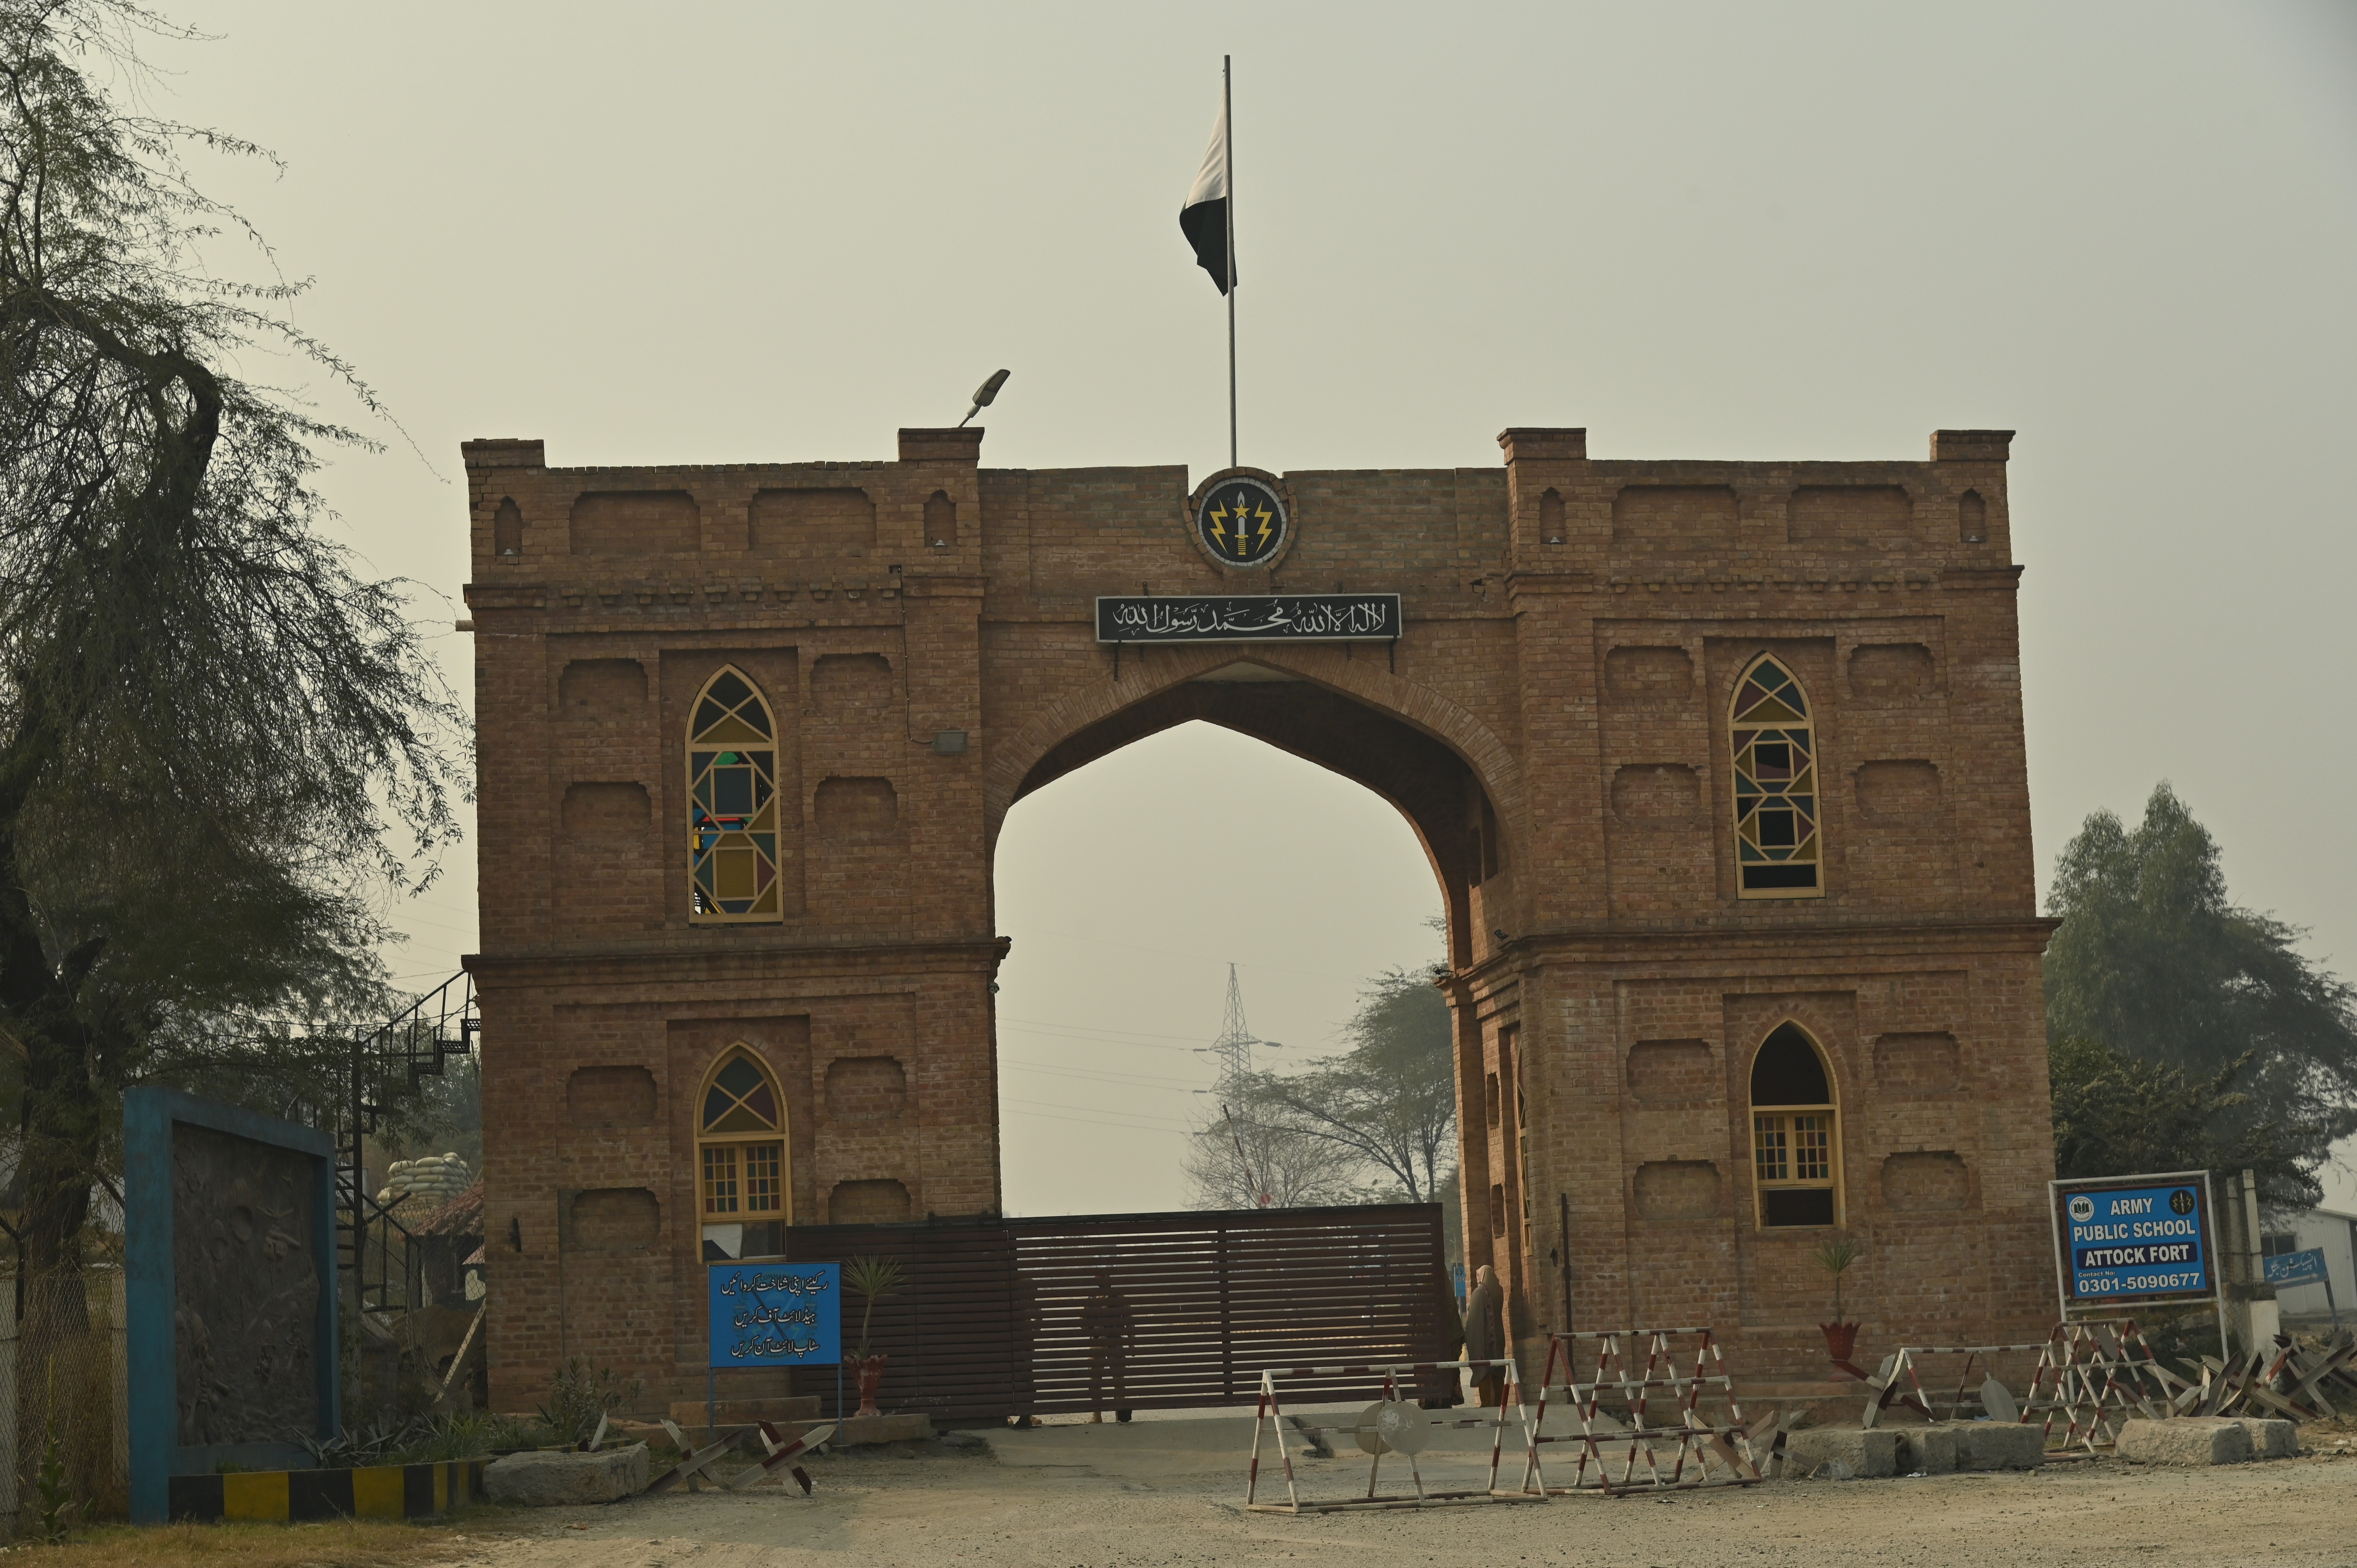 The Entrance gate of Army Public School, Attock Fort